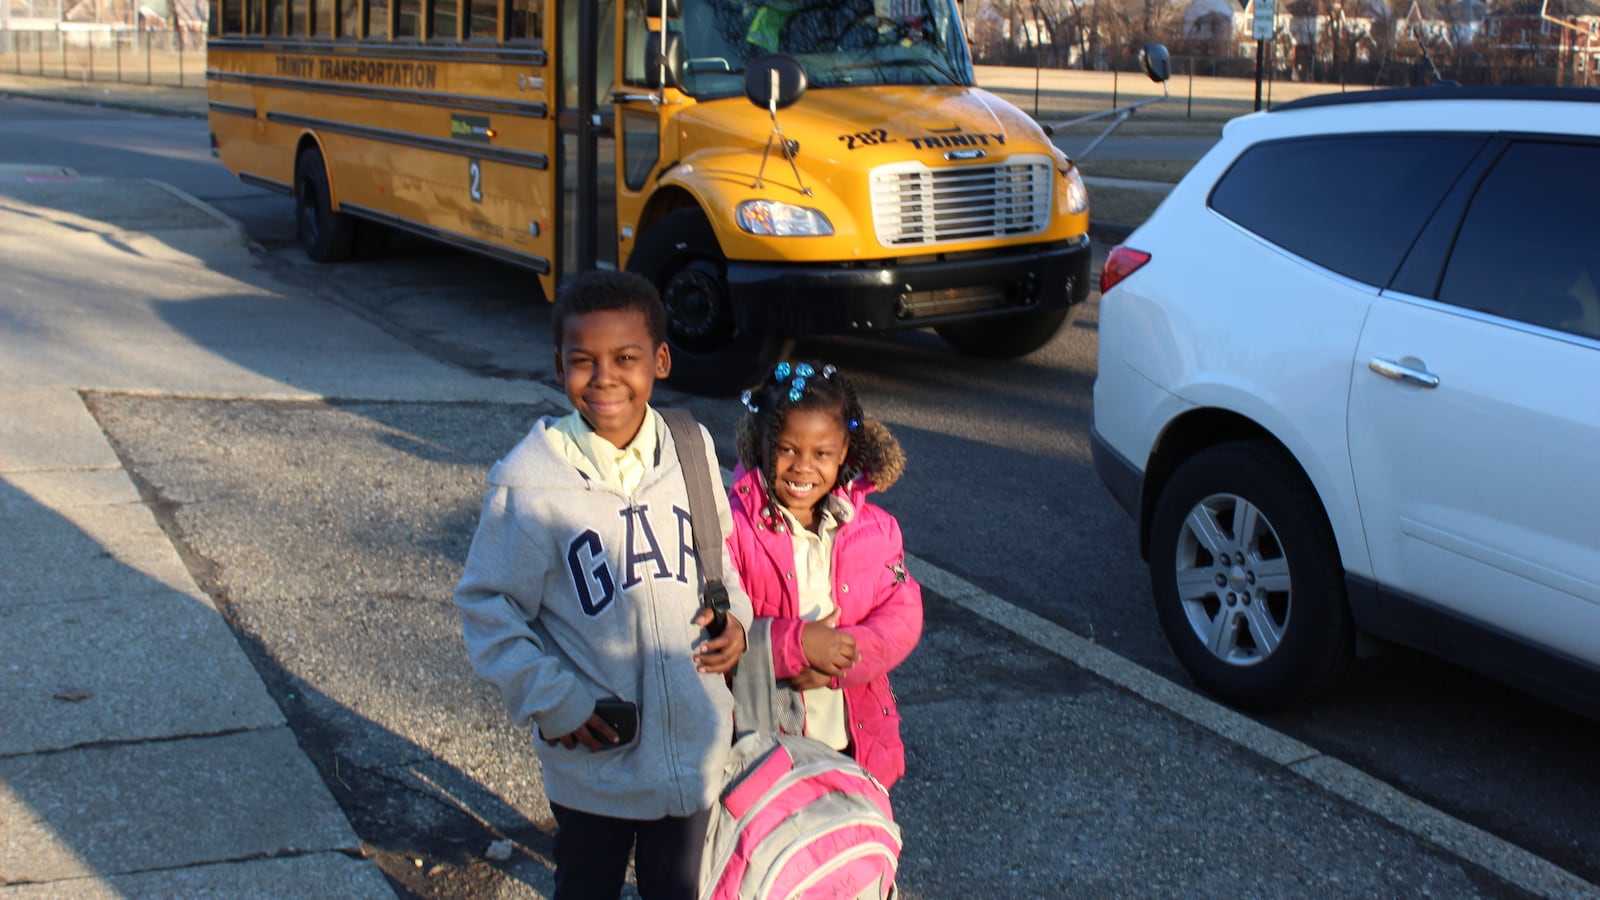 Two young children stand in front of a yellow school bus.